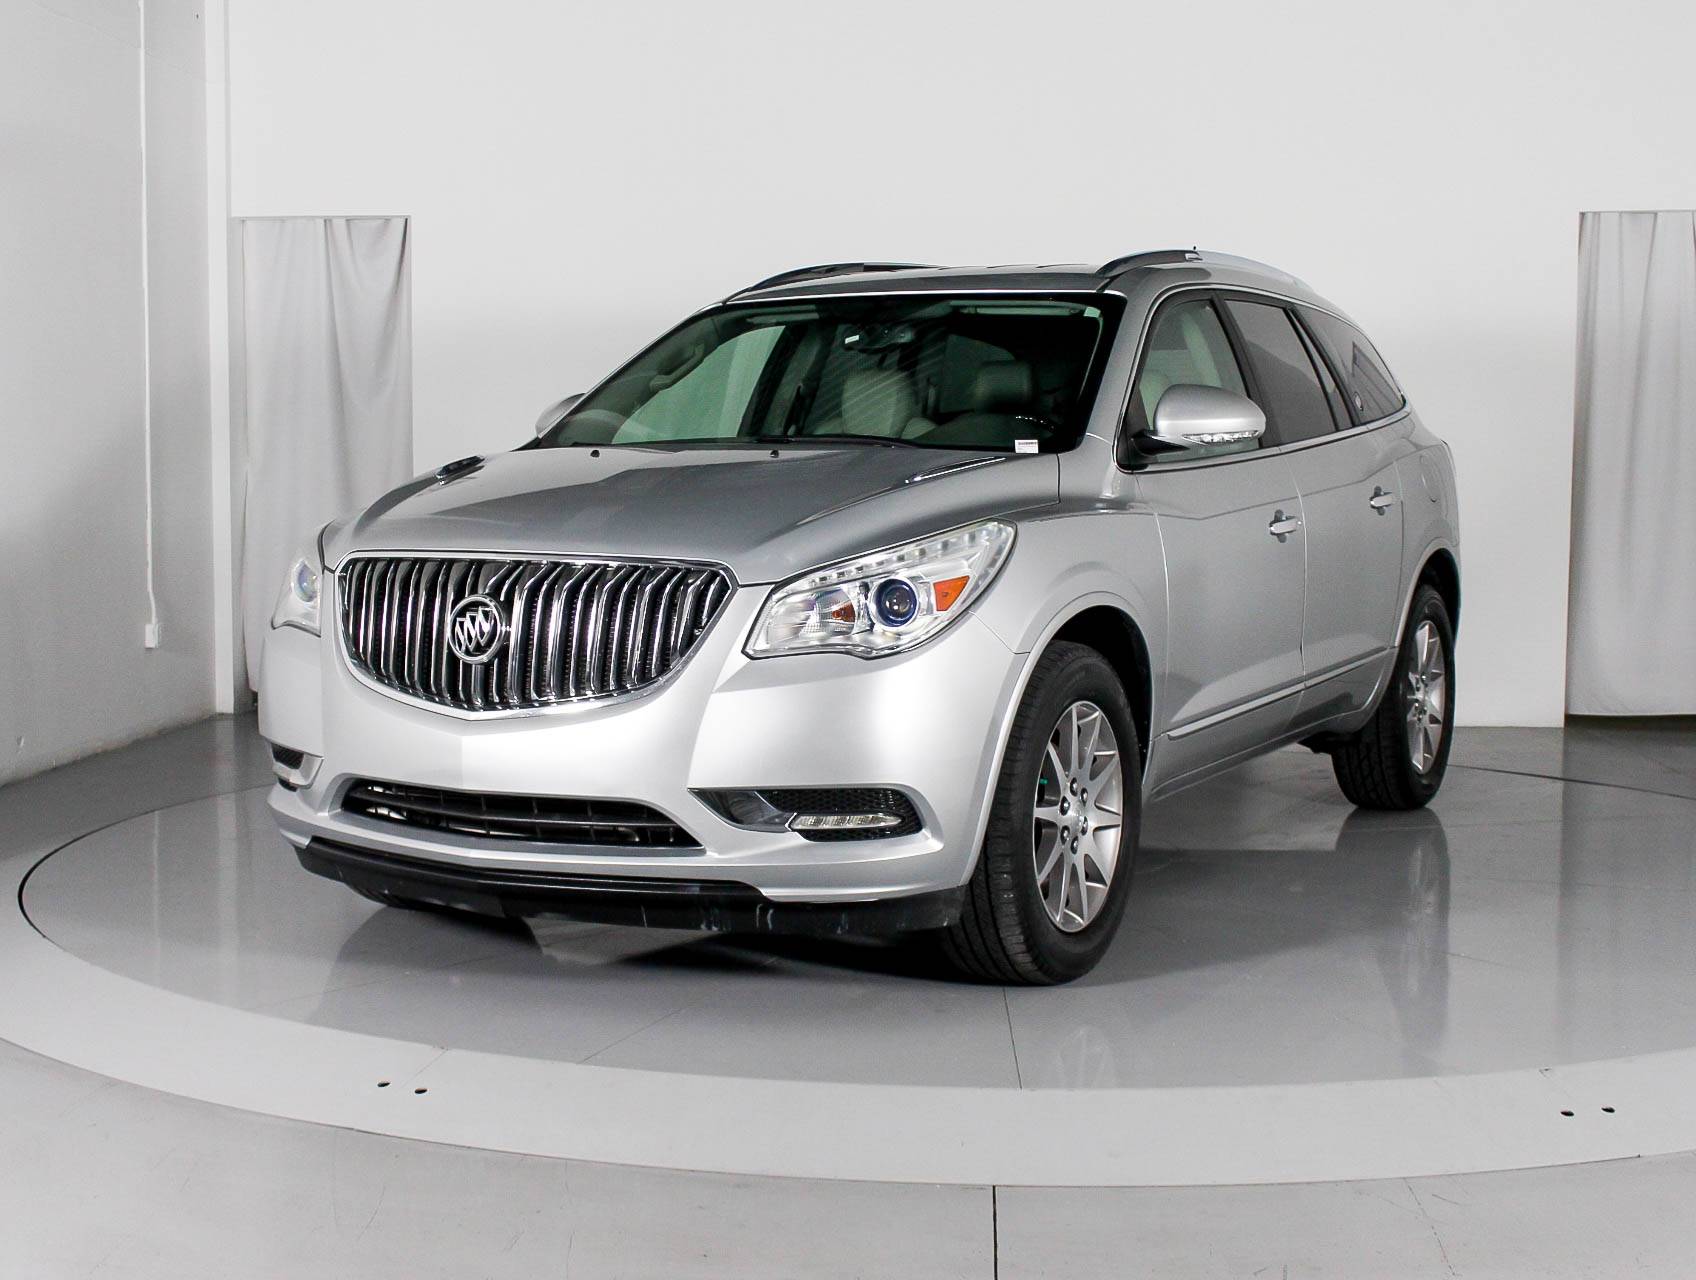 Florida Fine Cars - Used BUICK ENCLAVE 2016 MARGATE LEATHER